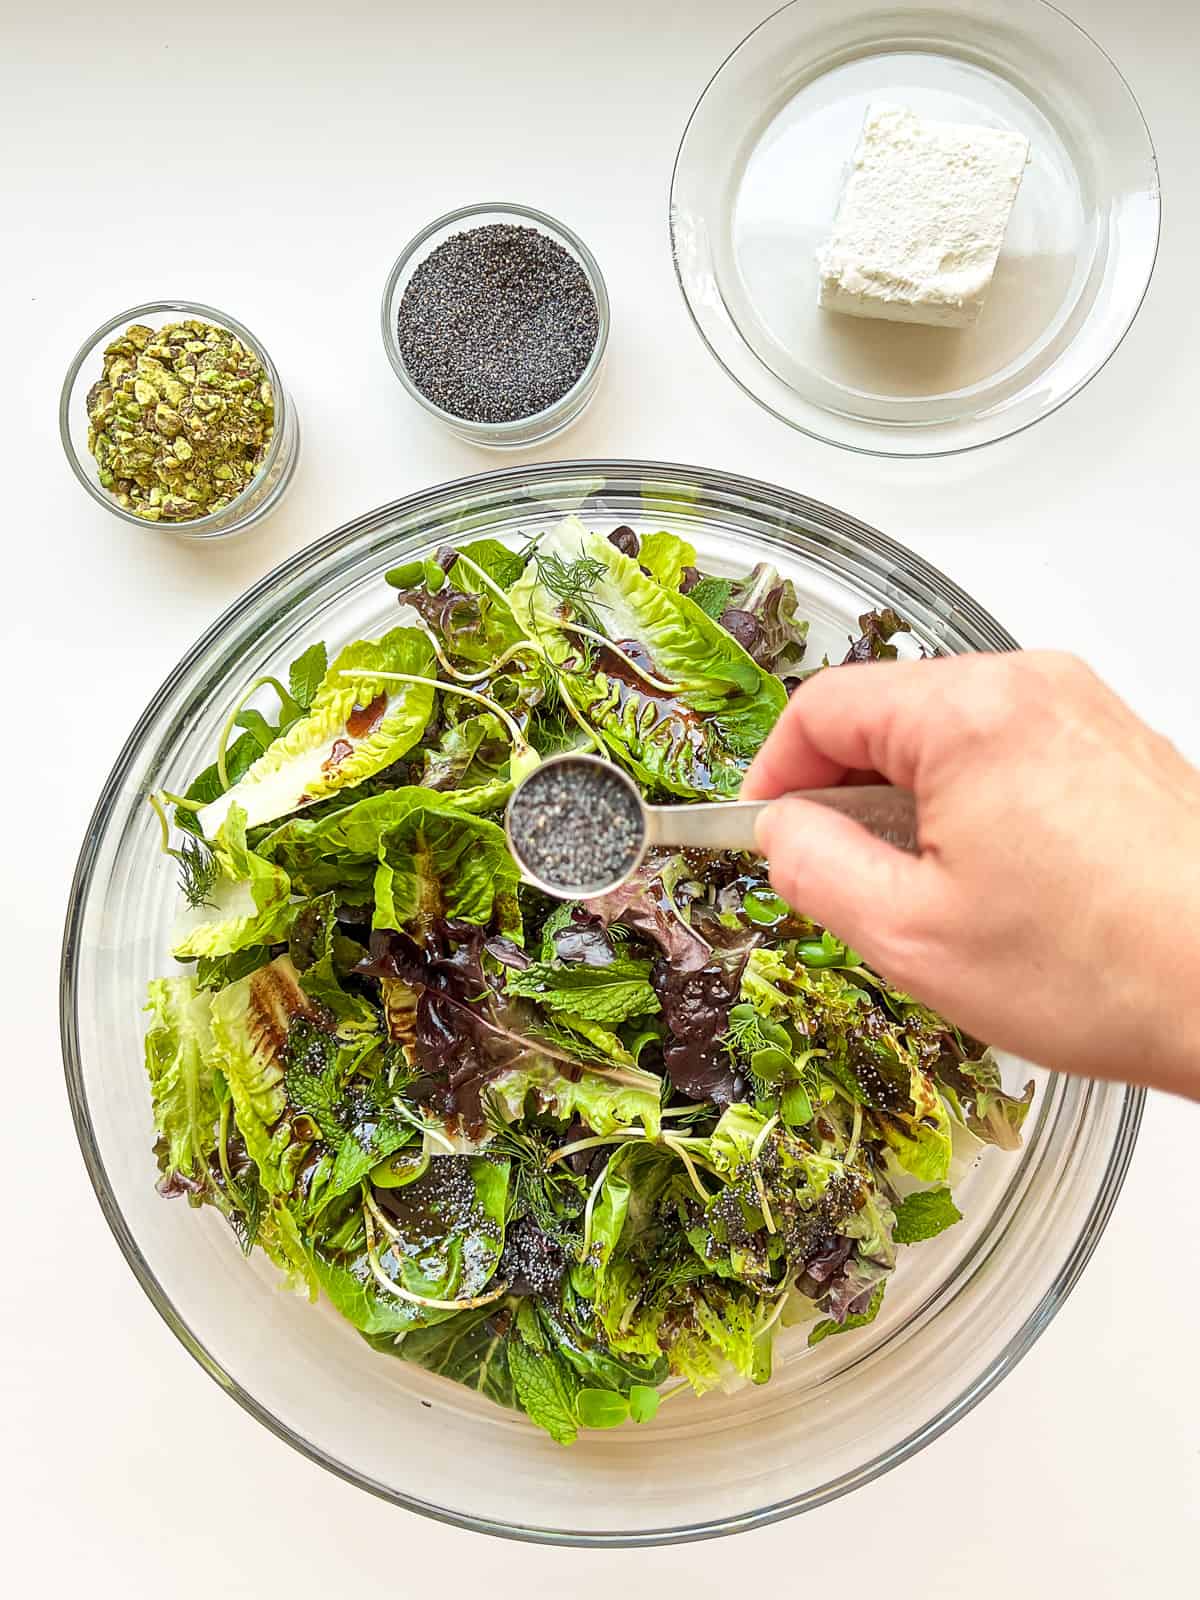 An image of a woman's hand sprinkling poppy seeds over a salad.